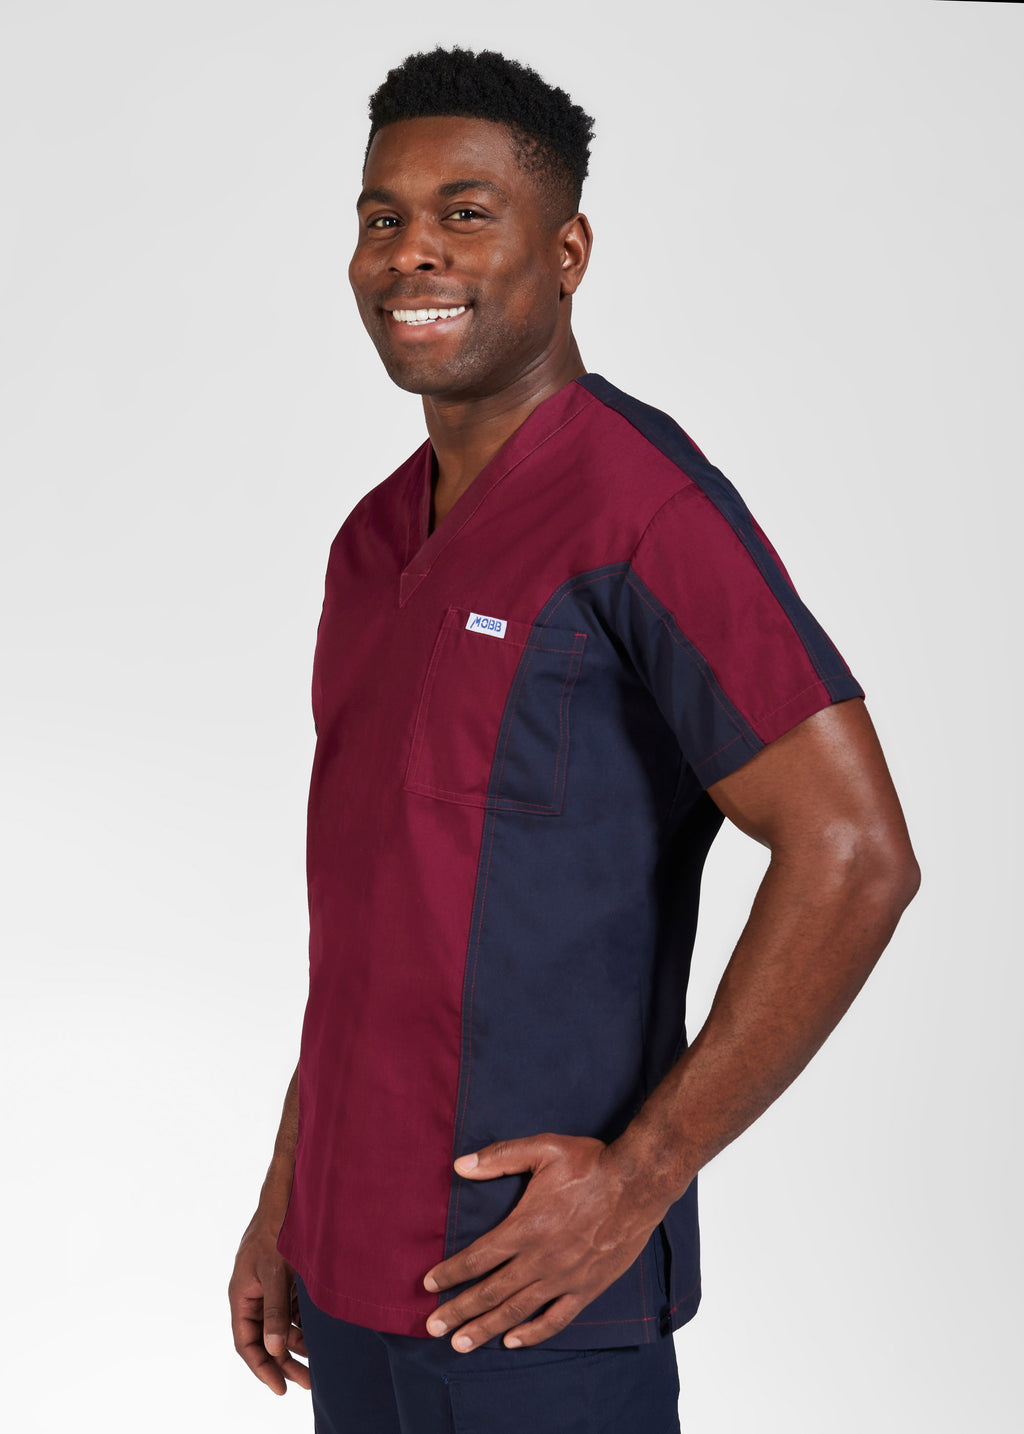 Product - Men's Two Tone Scrub Set With 8 Pockets